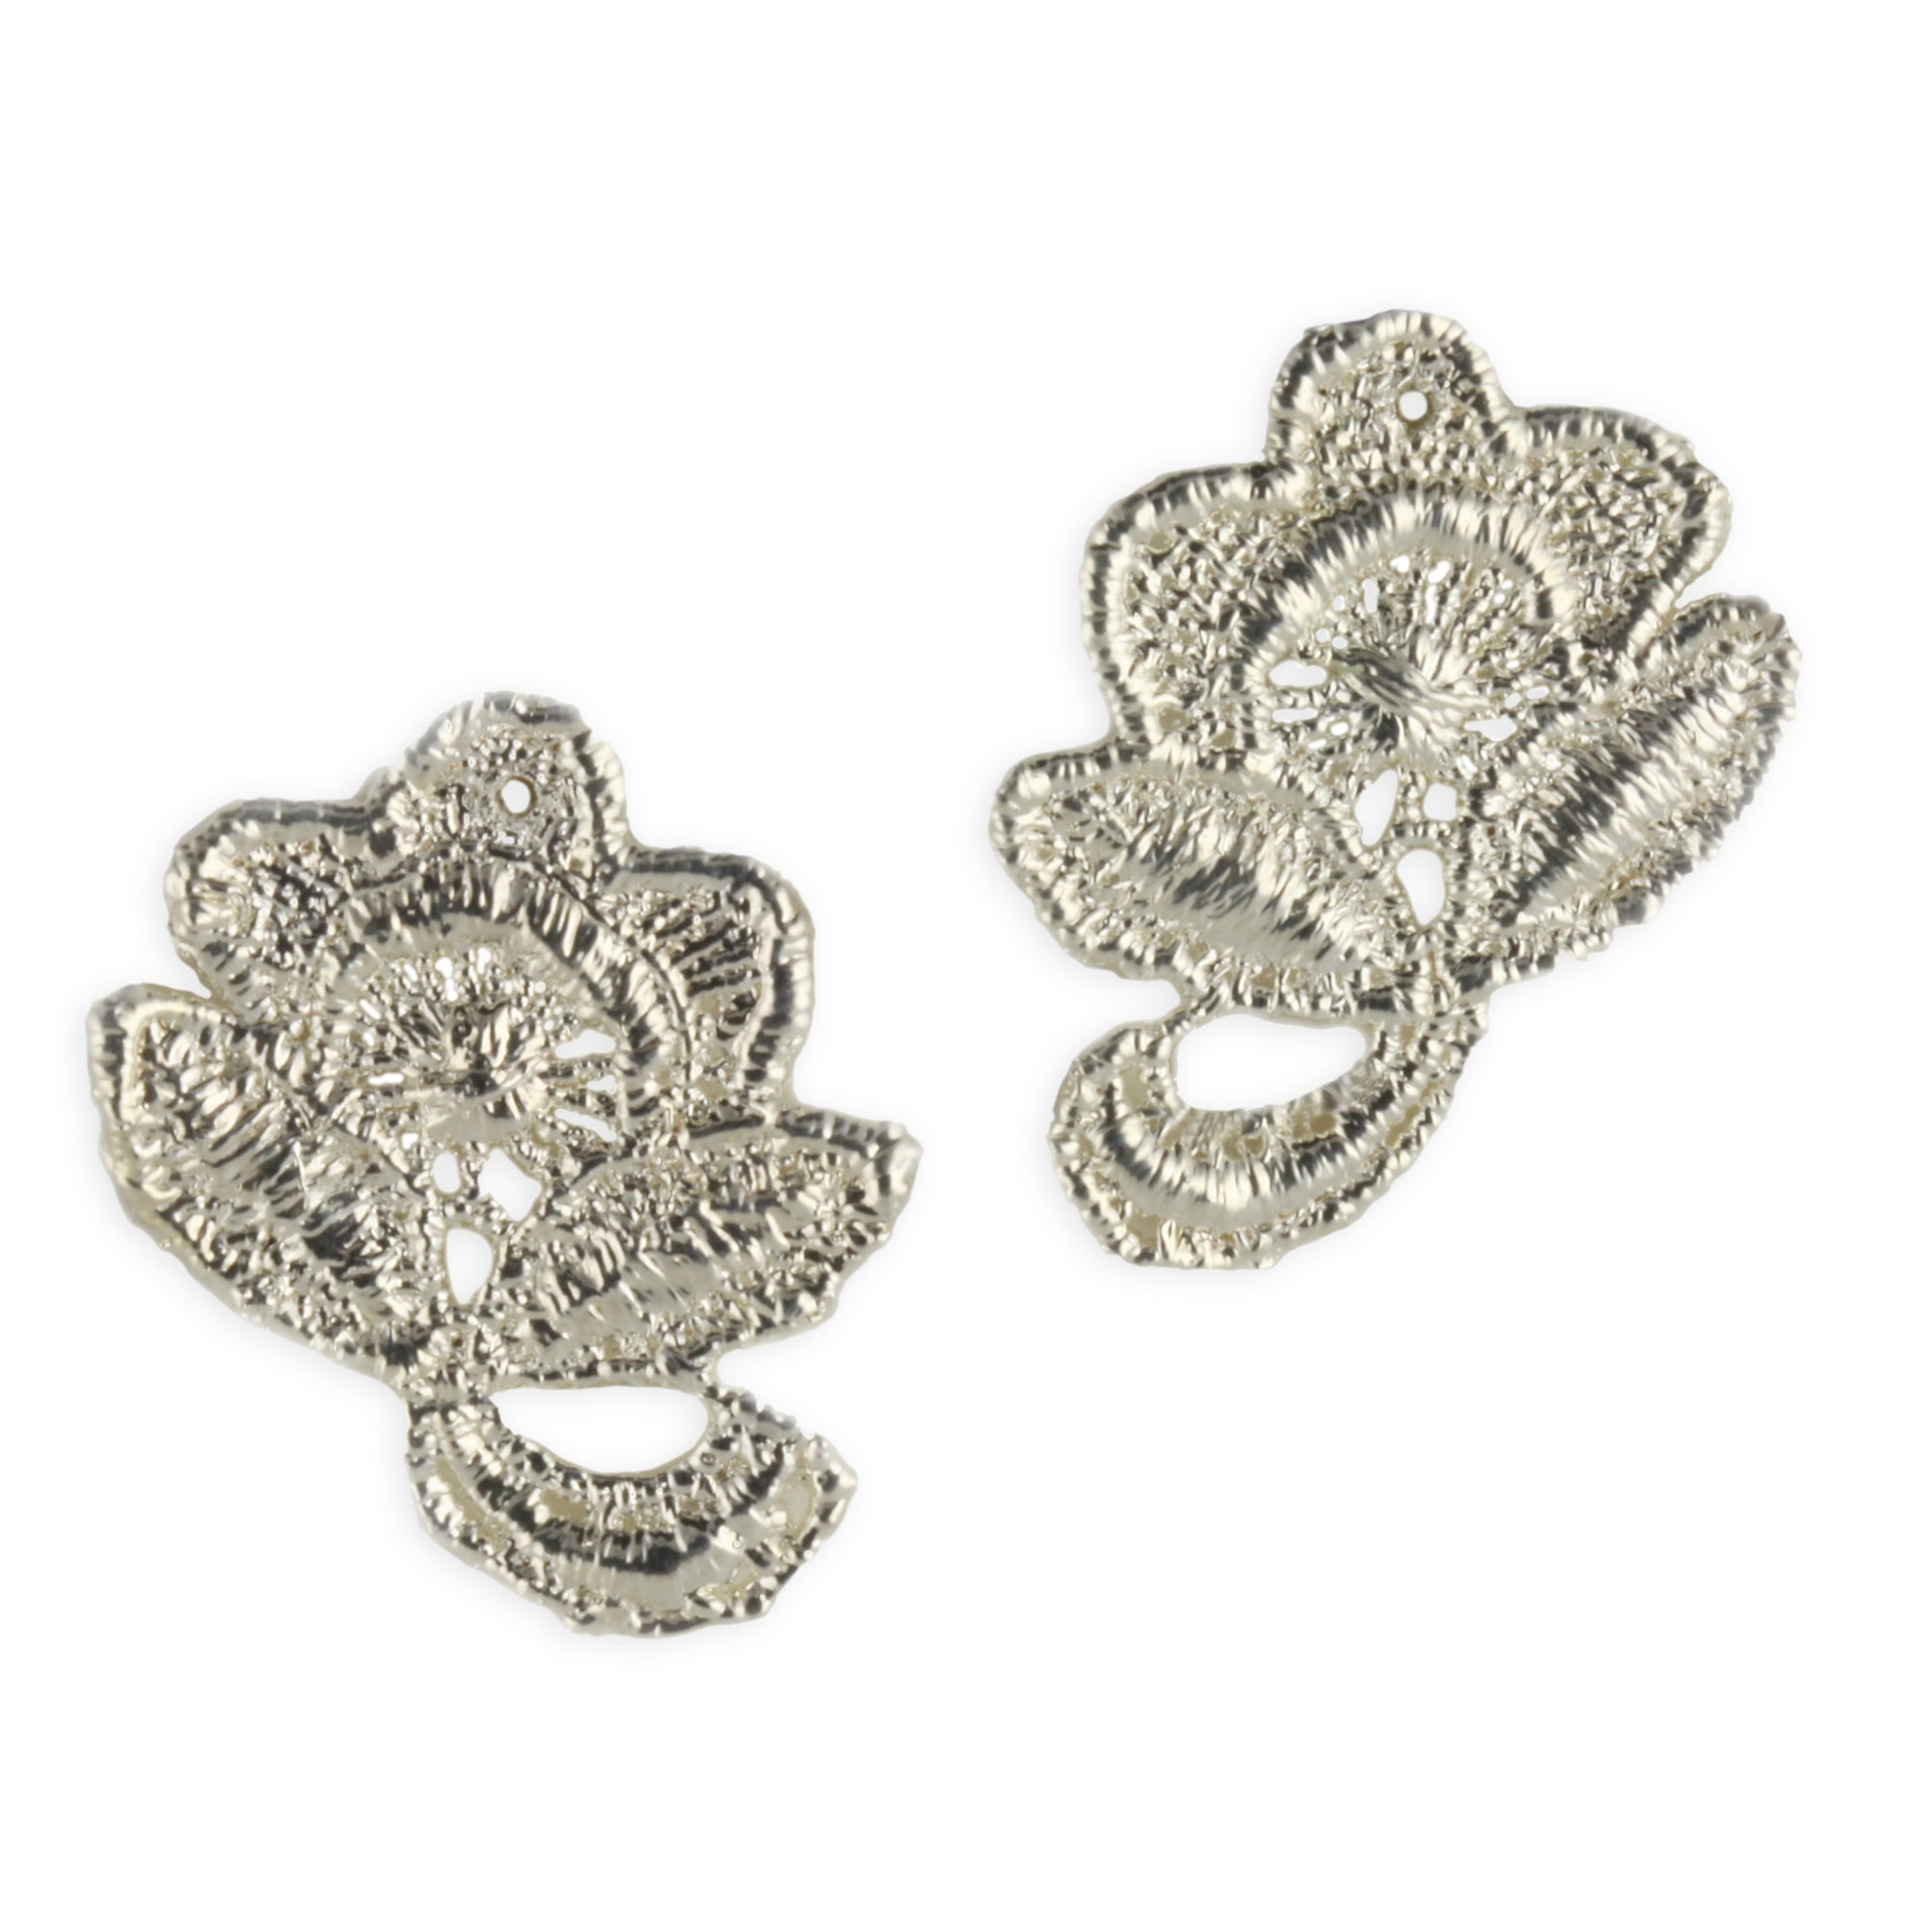 Flower stud earrings made from American lace dipped in 24k gold.